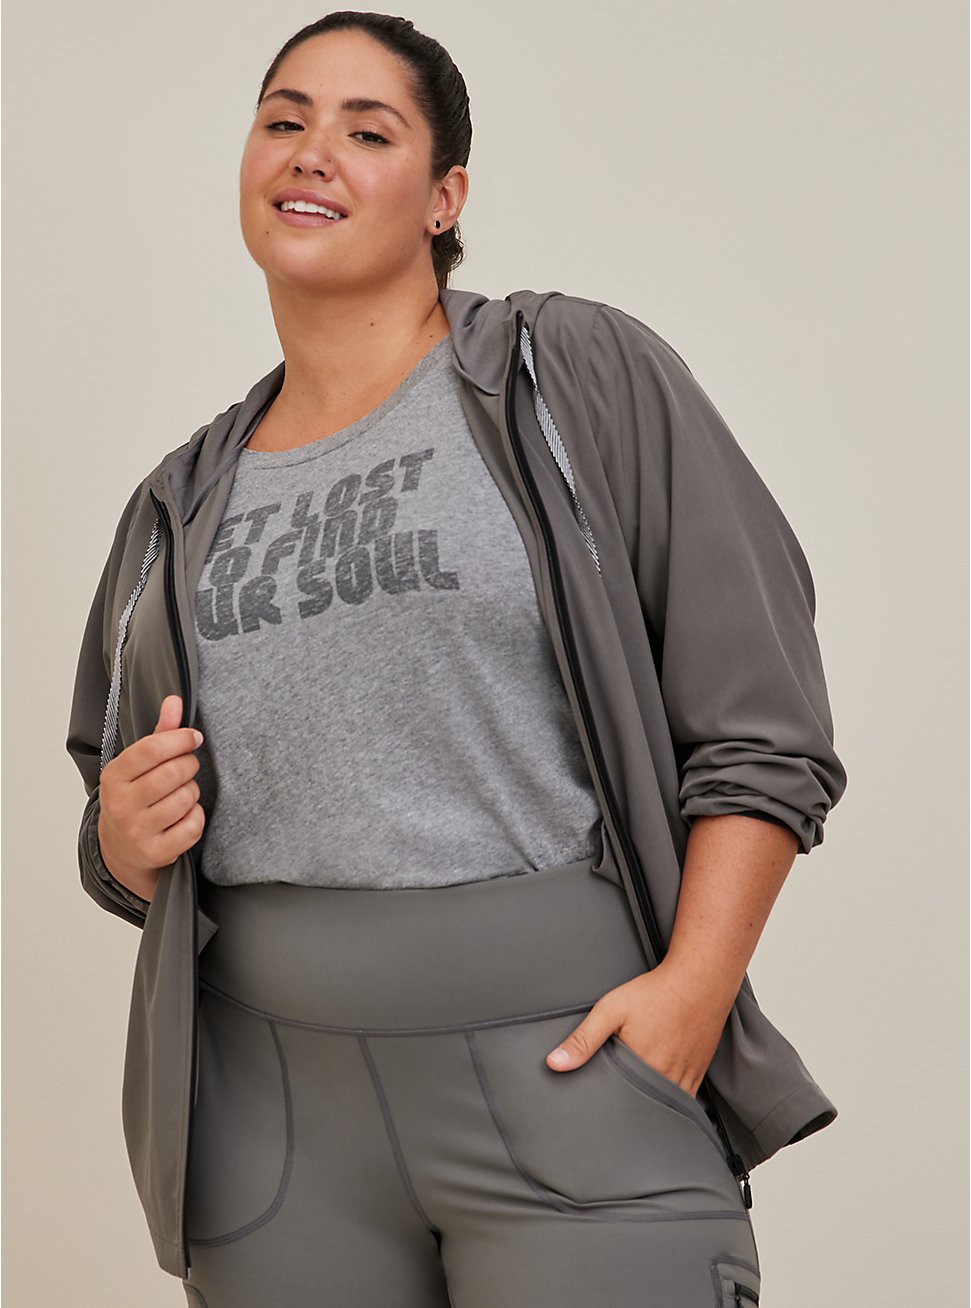 Plus Size Happy Camper Lightweight Zip Jacket - Stretch Woven Grey, GREY  CHARCOAL, hi-res